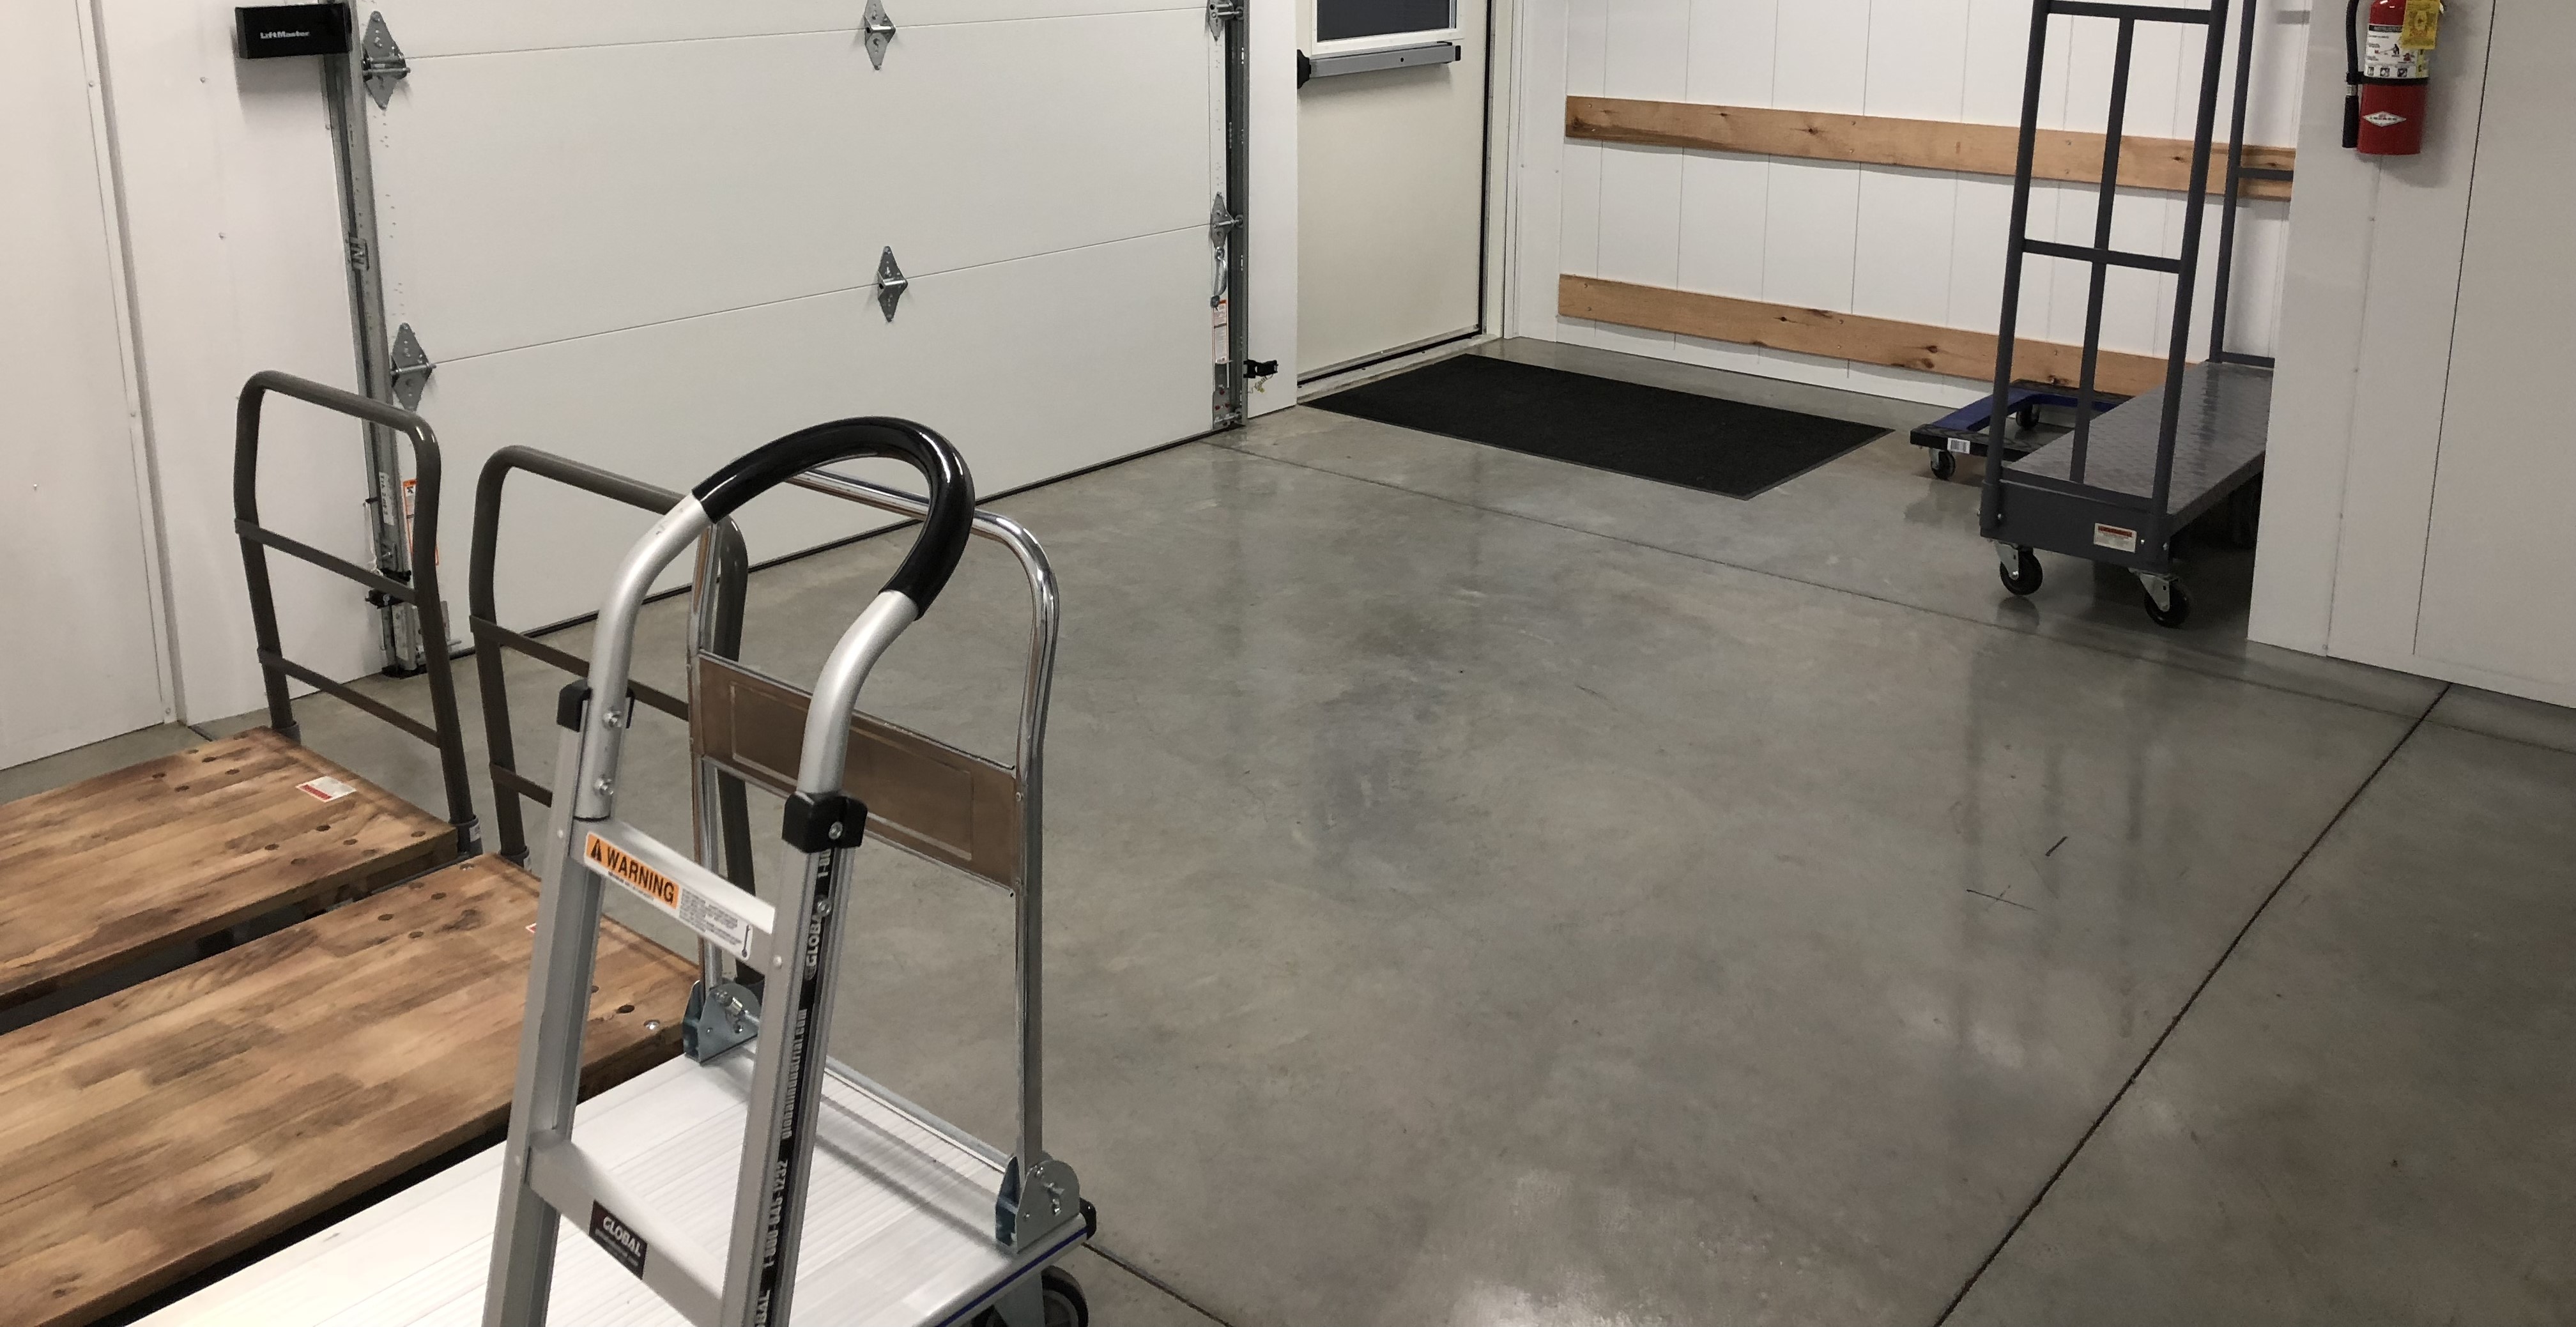 Load Bay & Plenty of Carts for Indoor Access Climate Units